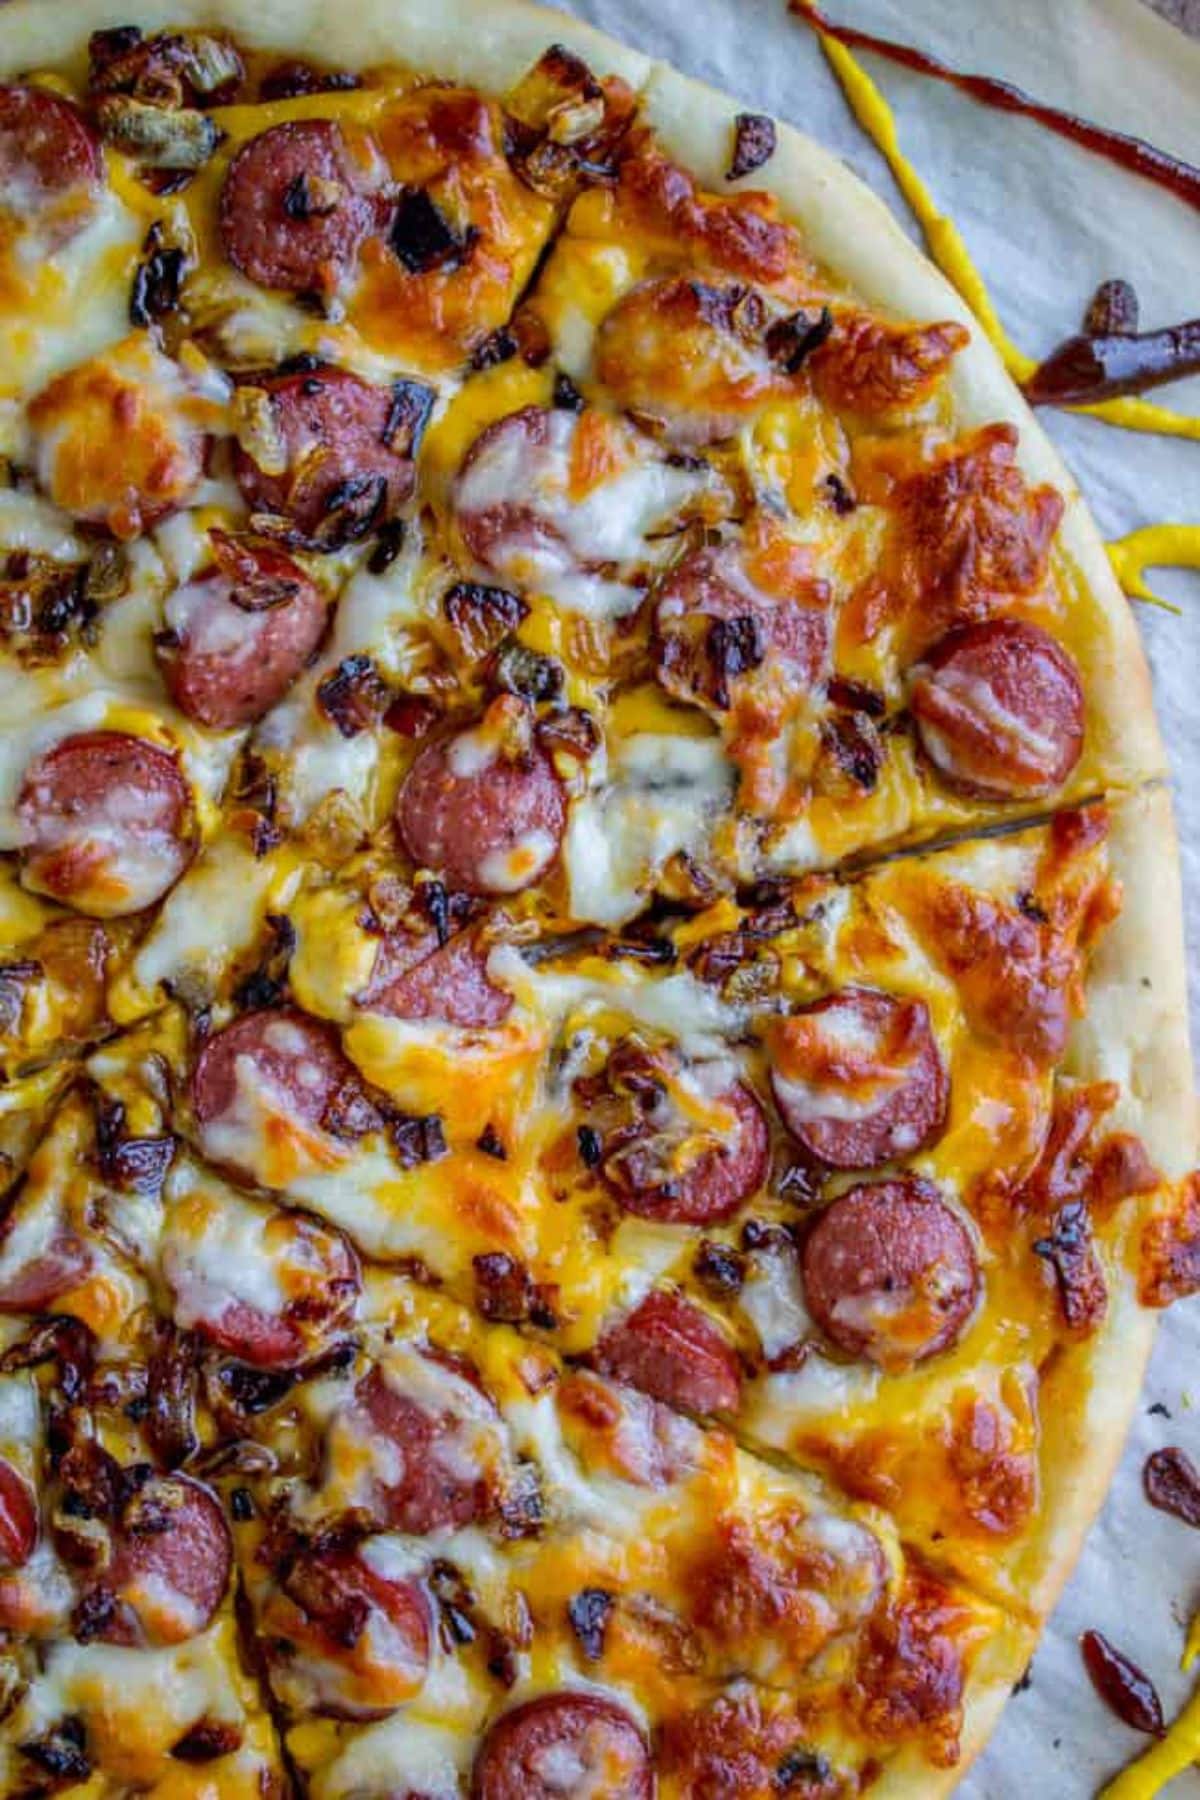 Flavorful hot dog pizza on a table.